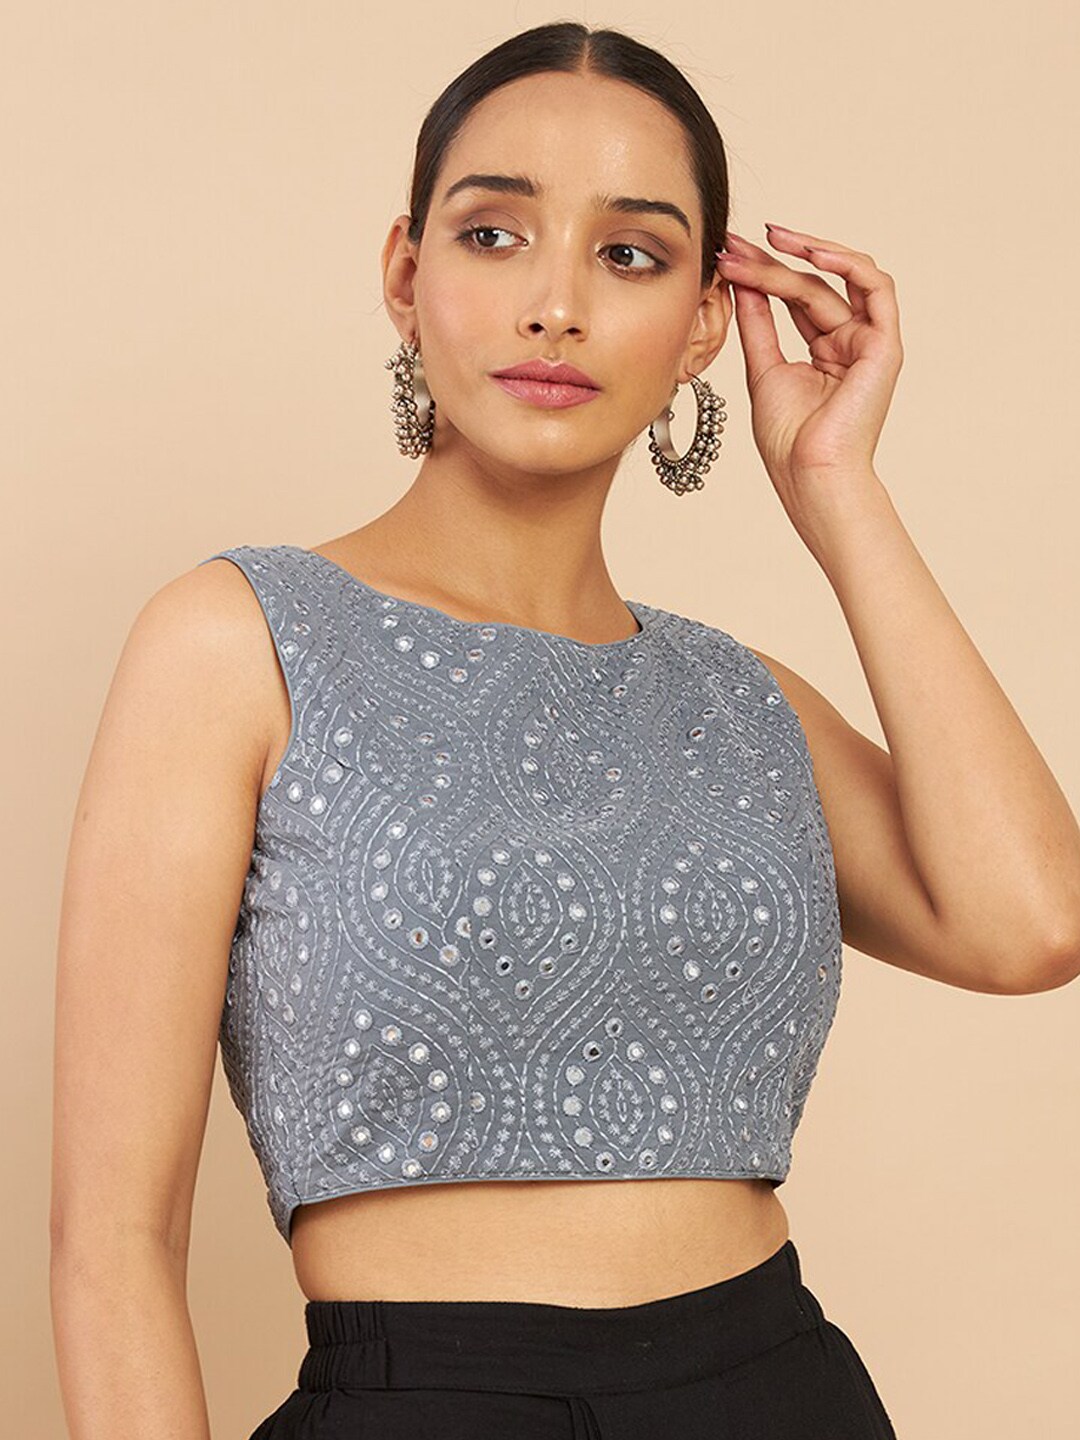 Soch Grey Embroidered Mirror Work Georgette Saree Blouse Price in India